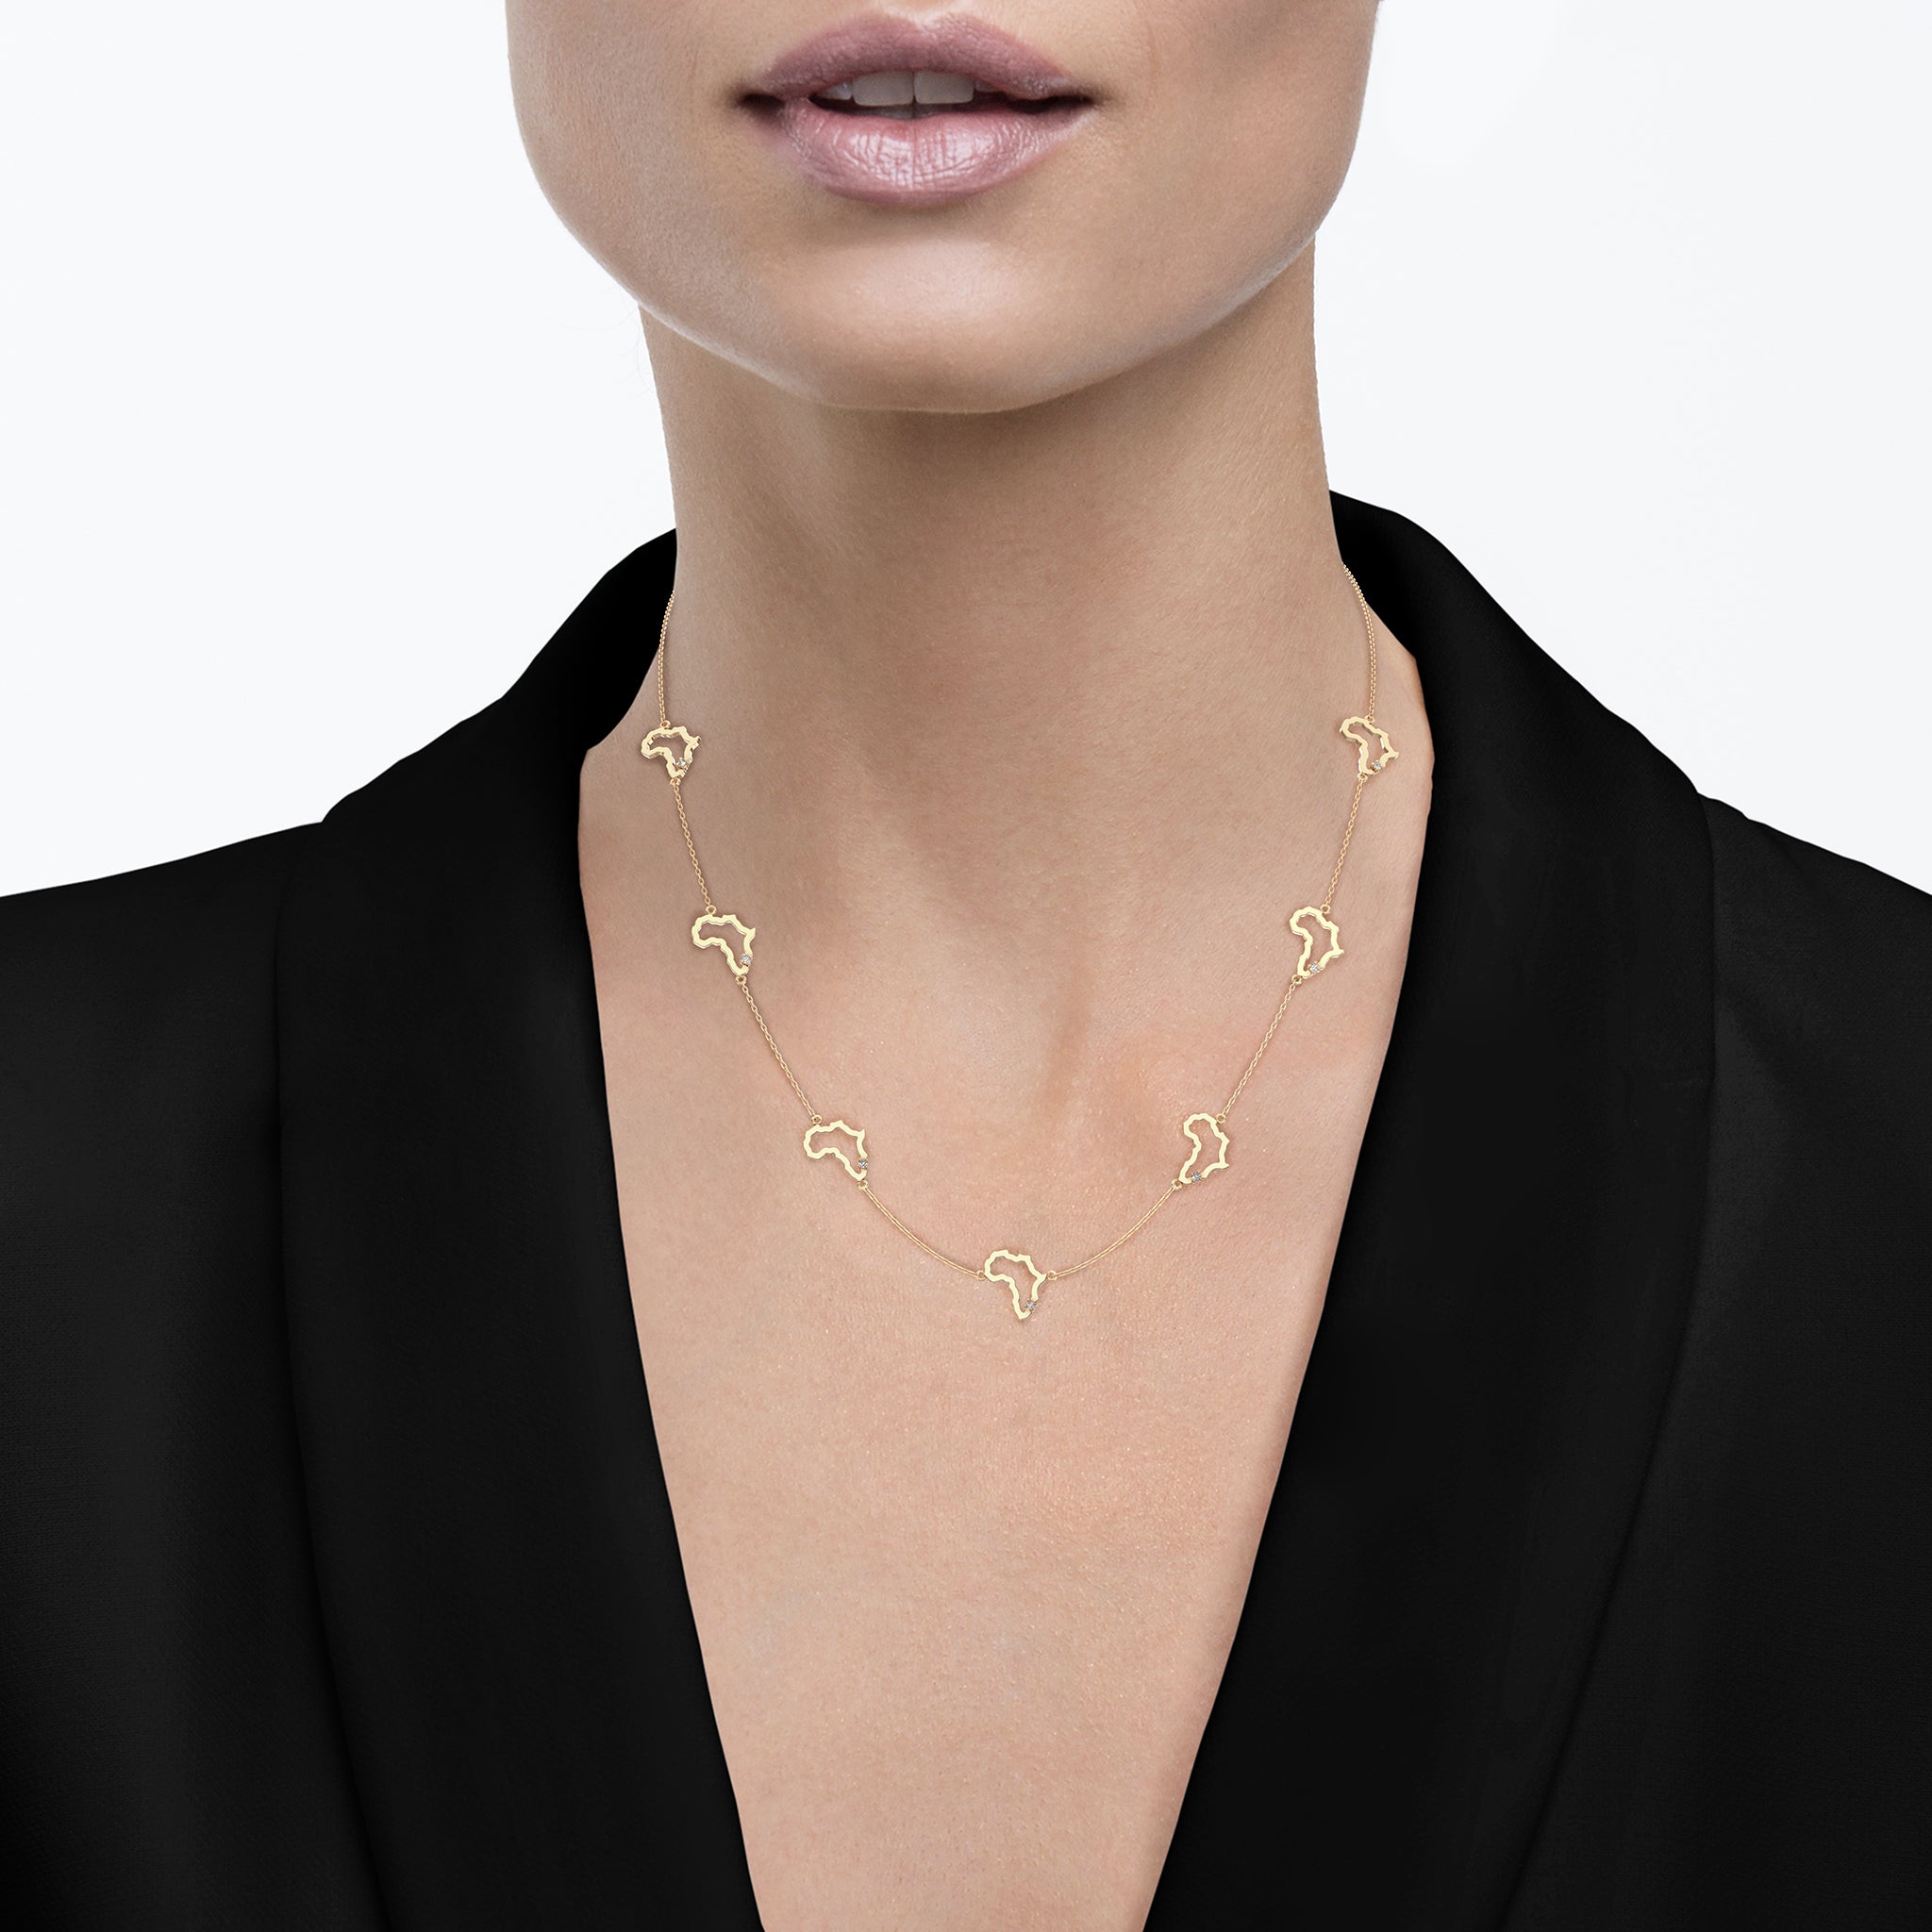 Shimansky - Women Wearing the My Africa Diamond Station Necklace Crafted in 14K Yellow Gold